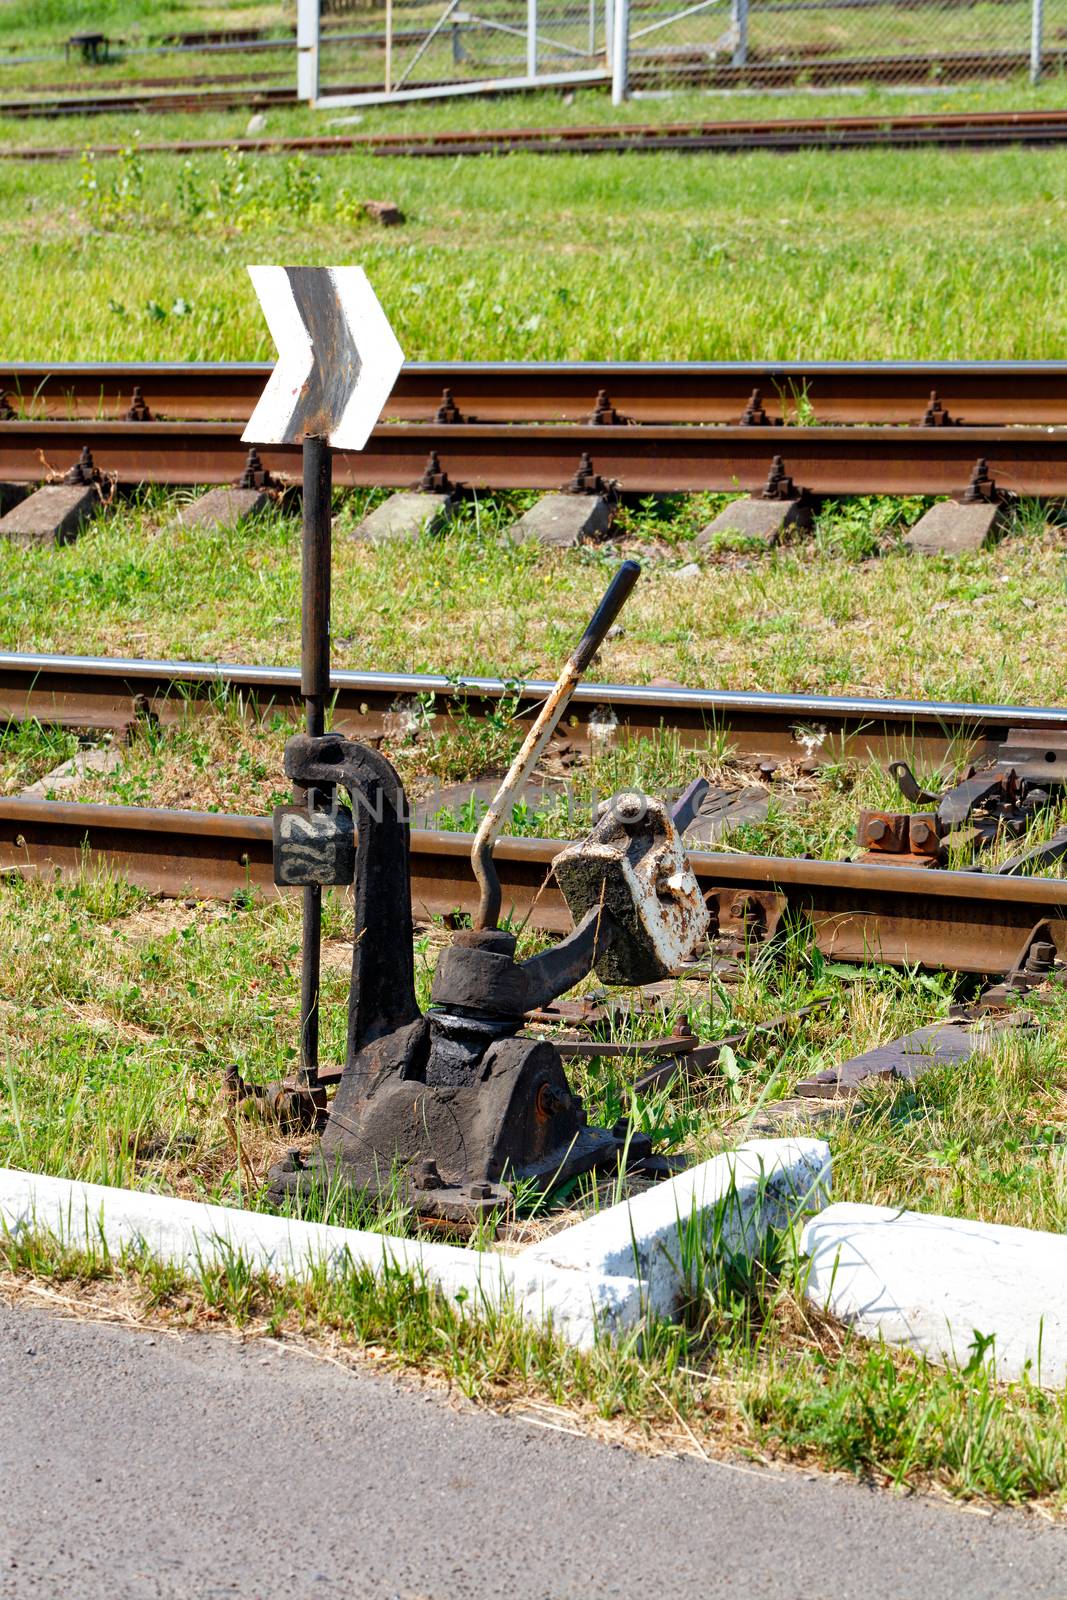 Vintage manual translator of railway arrows. The mechanism of the railway switch on the background of railway tracks and green grass on a sunny day.